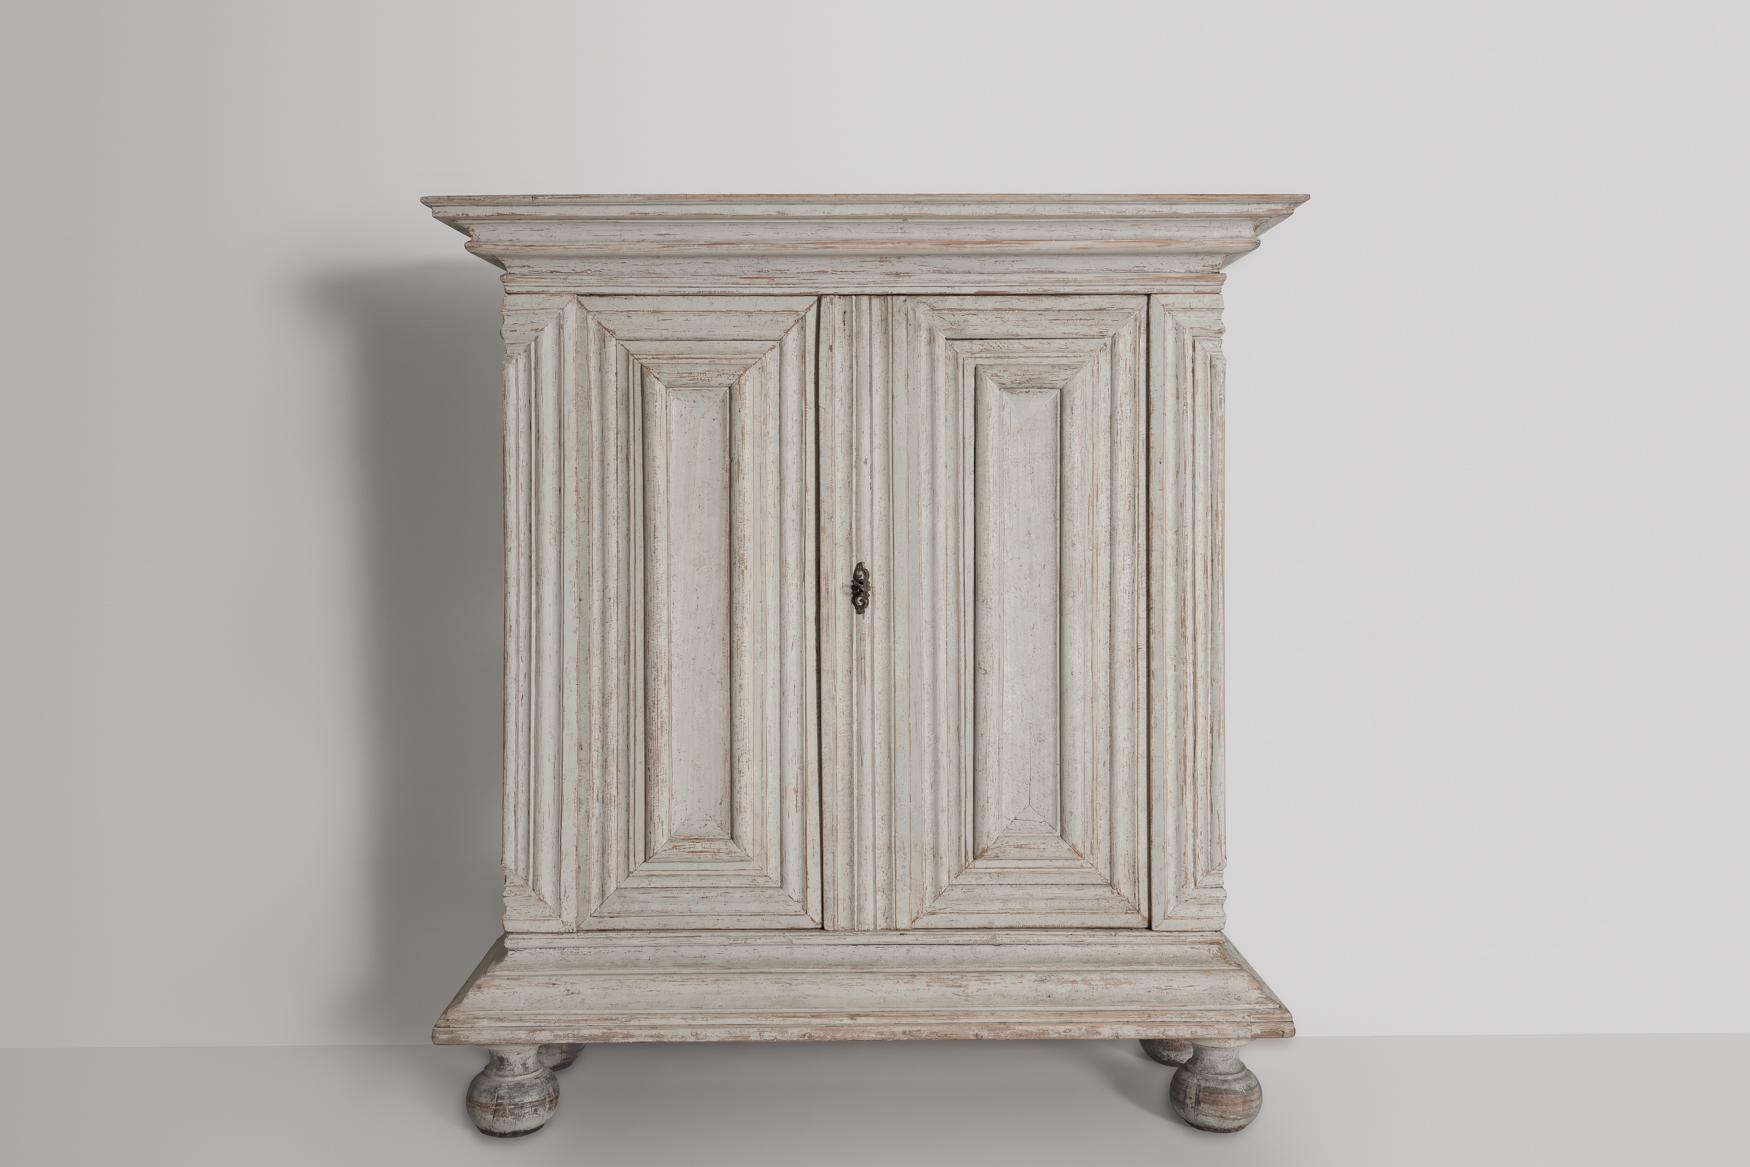 A fabulous Swedish baroque period cabinet from the 18th century, circa 1760 in later, not original, paint. The large doors sit above a single drawer and open to reveal two removable, internal shelves. This is a fabulous piece with plenty of storage.